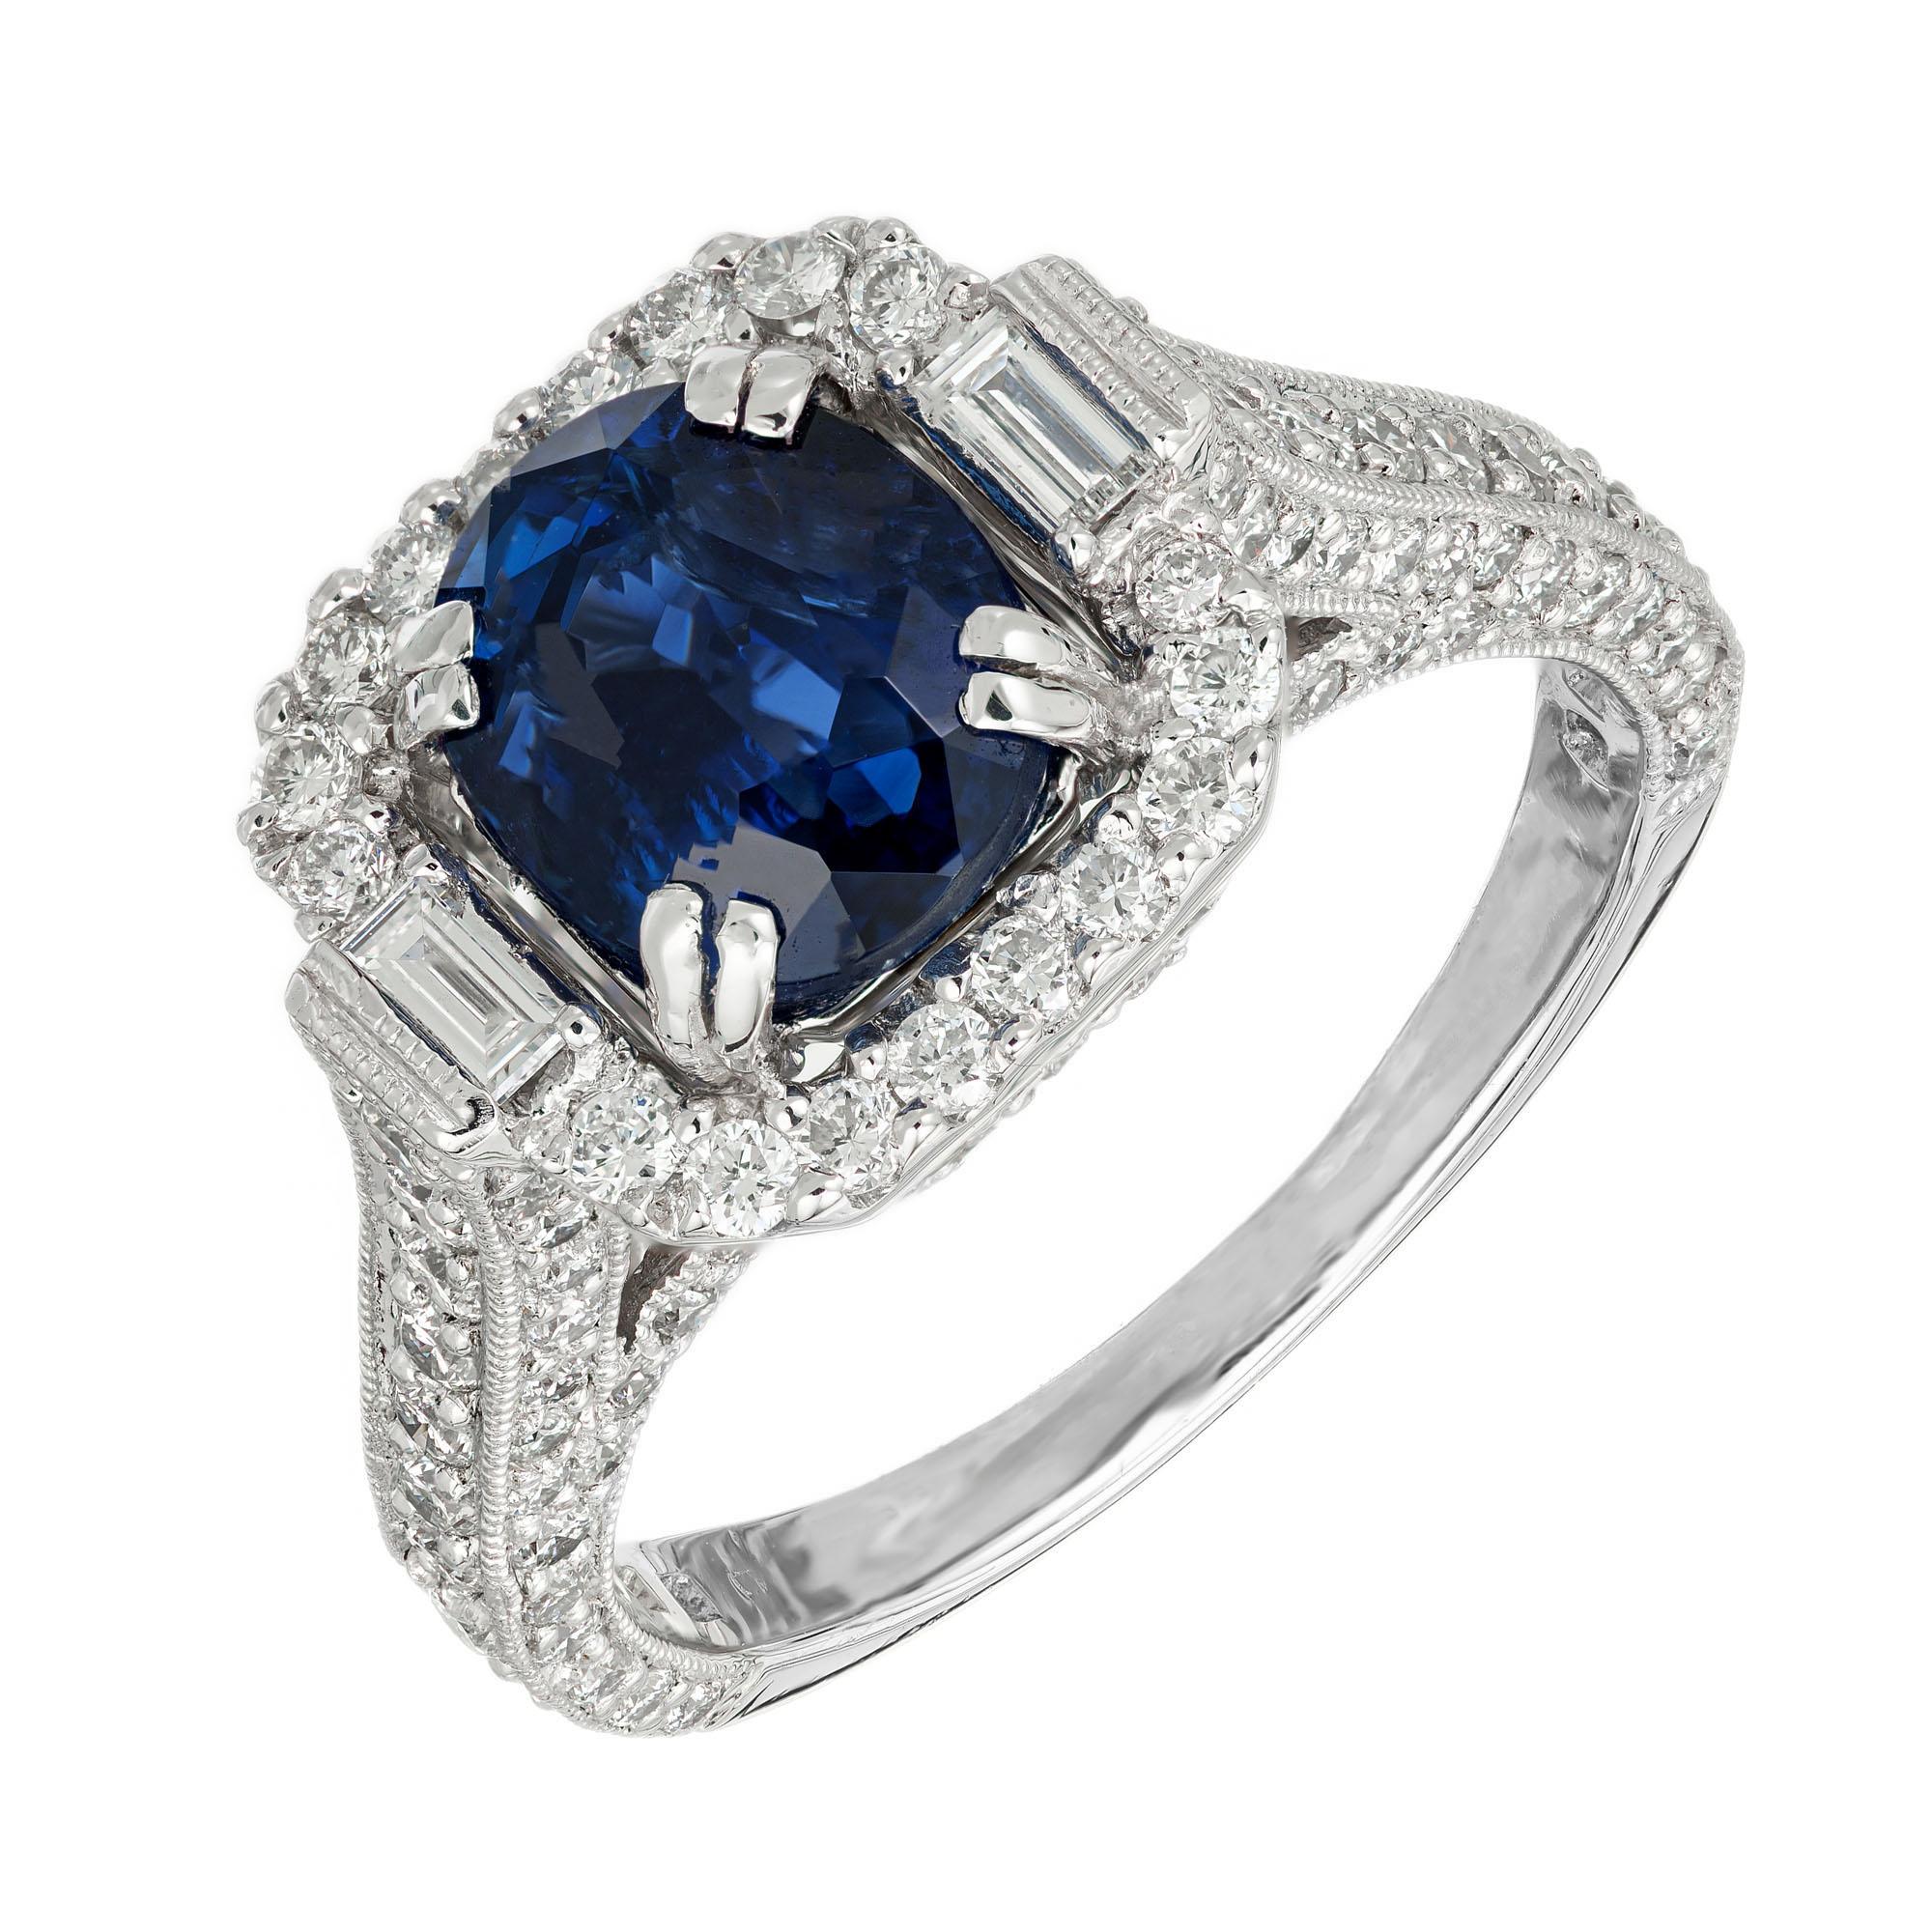 1940's late Art Deco Sapphire and diamond engagement ring. AGL certified natural oval center stone with a halo of round and baguette cut diamonds in a platinum Art Deco style setting with round diamonds along both sides of the shank. 

1 fine